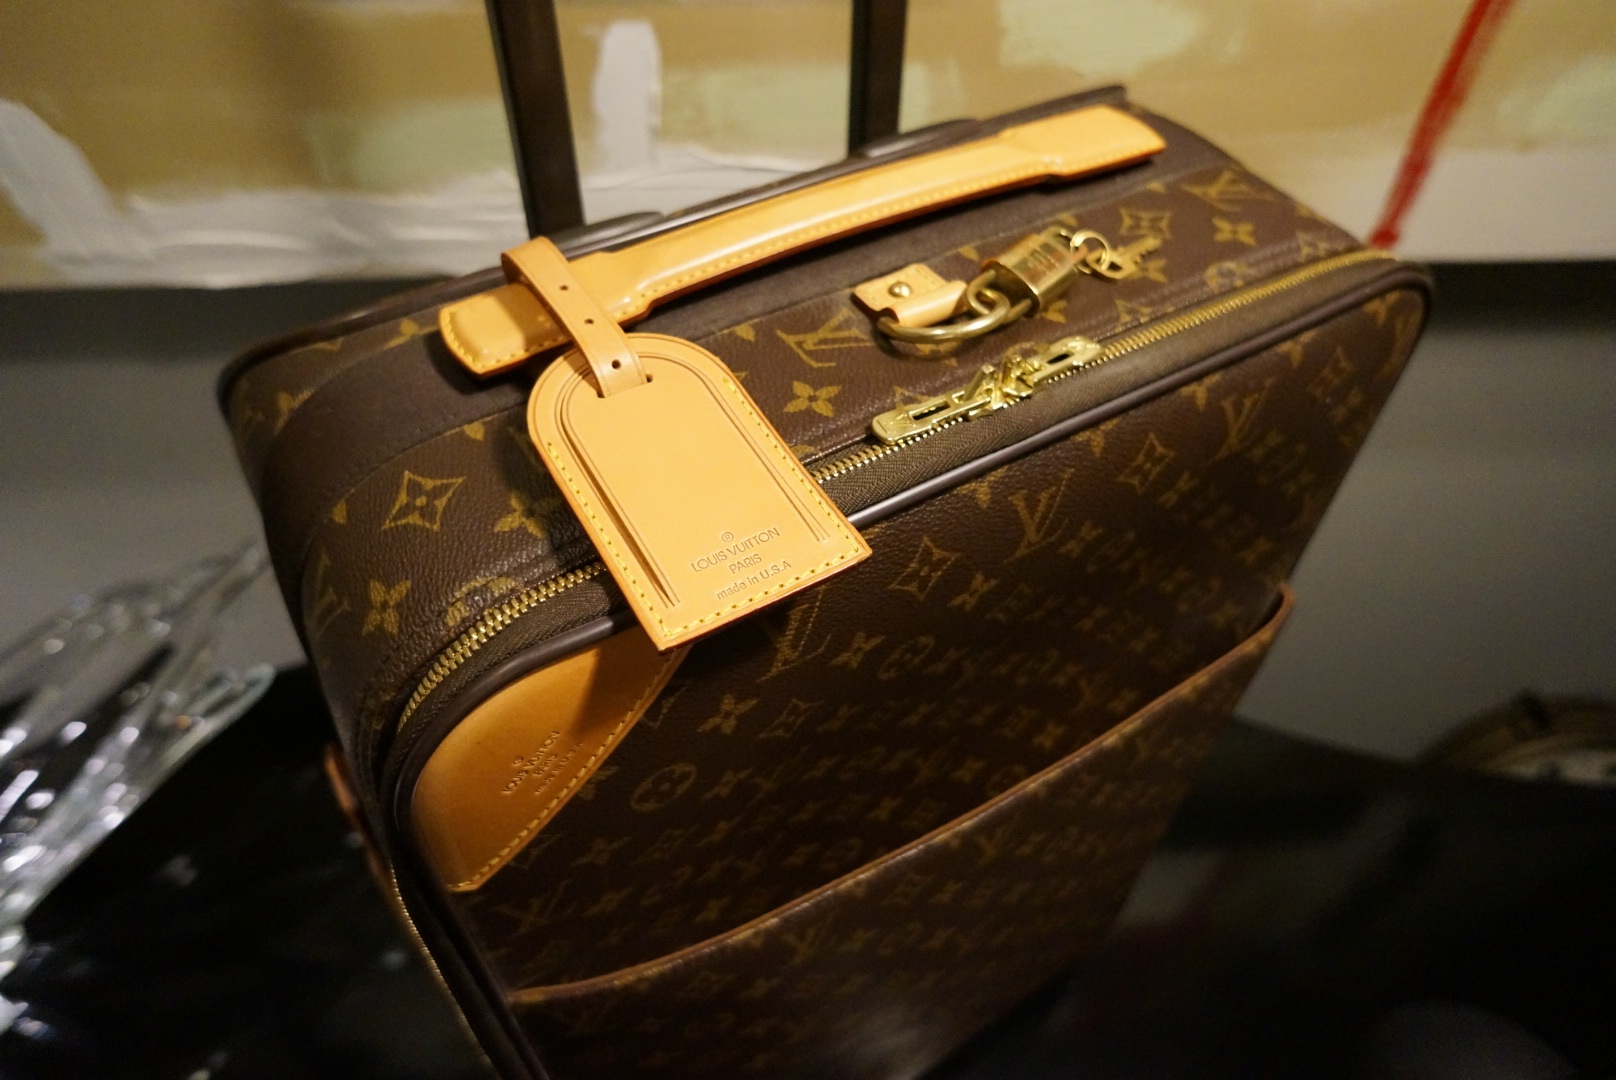 lv carry on suitcase